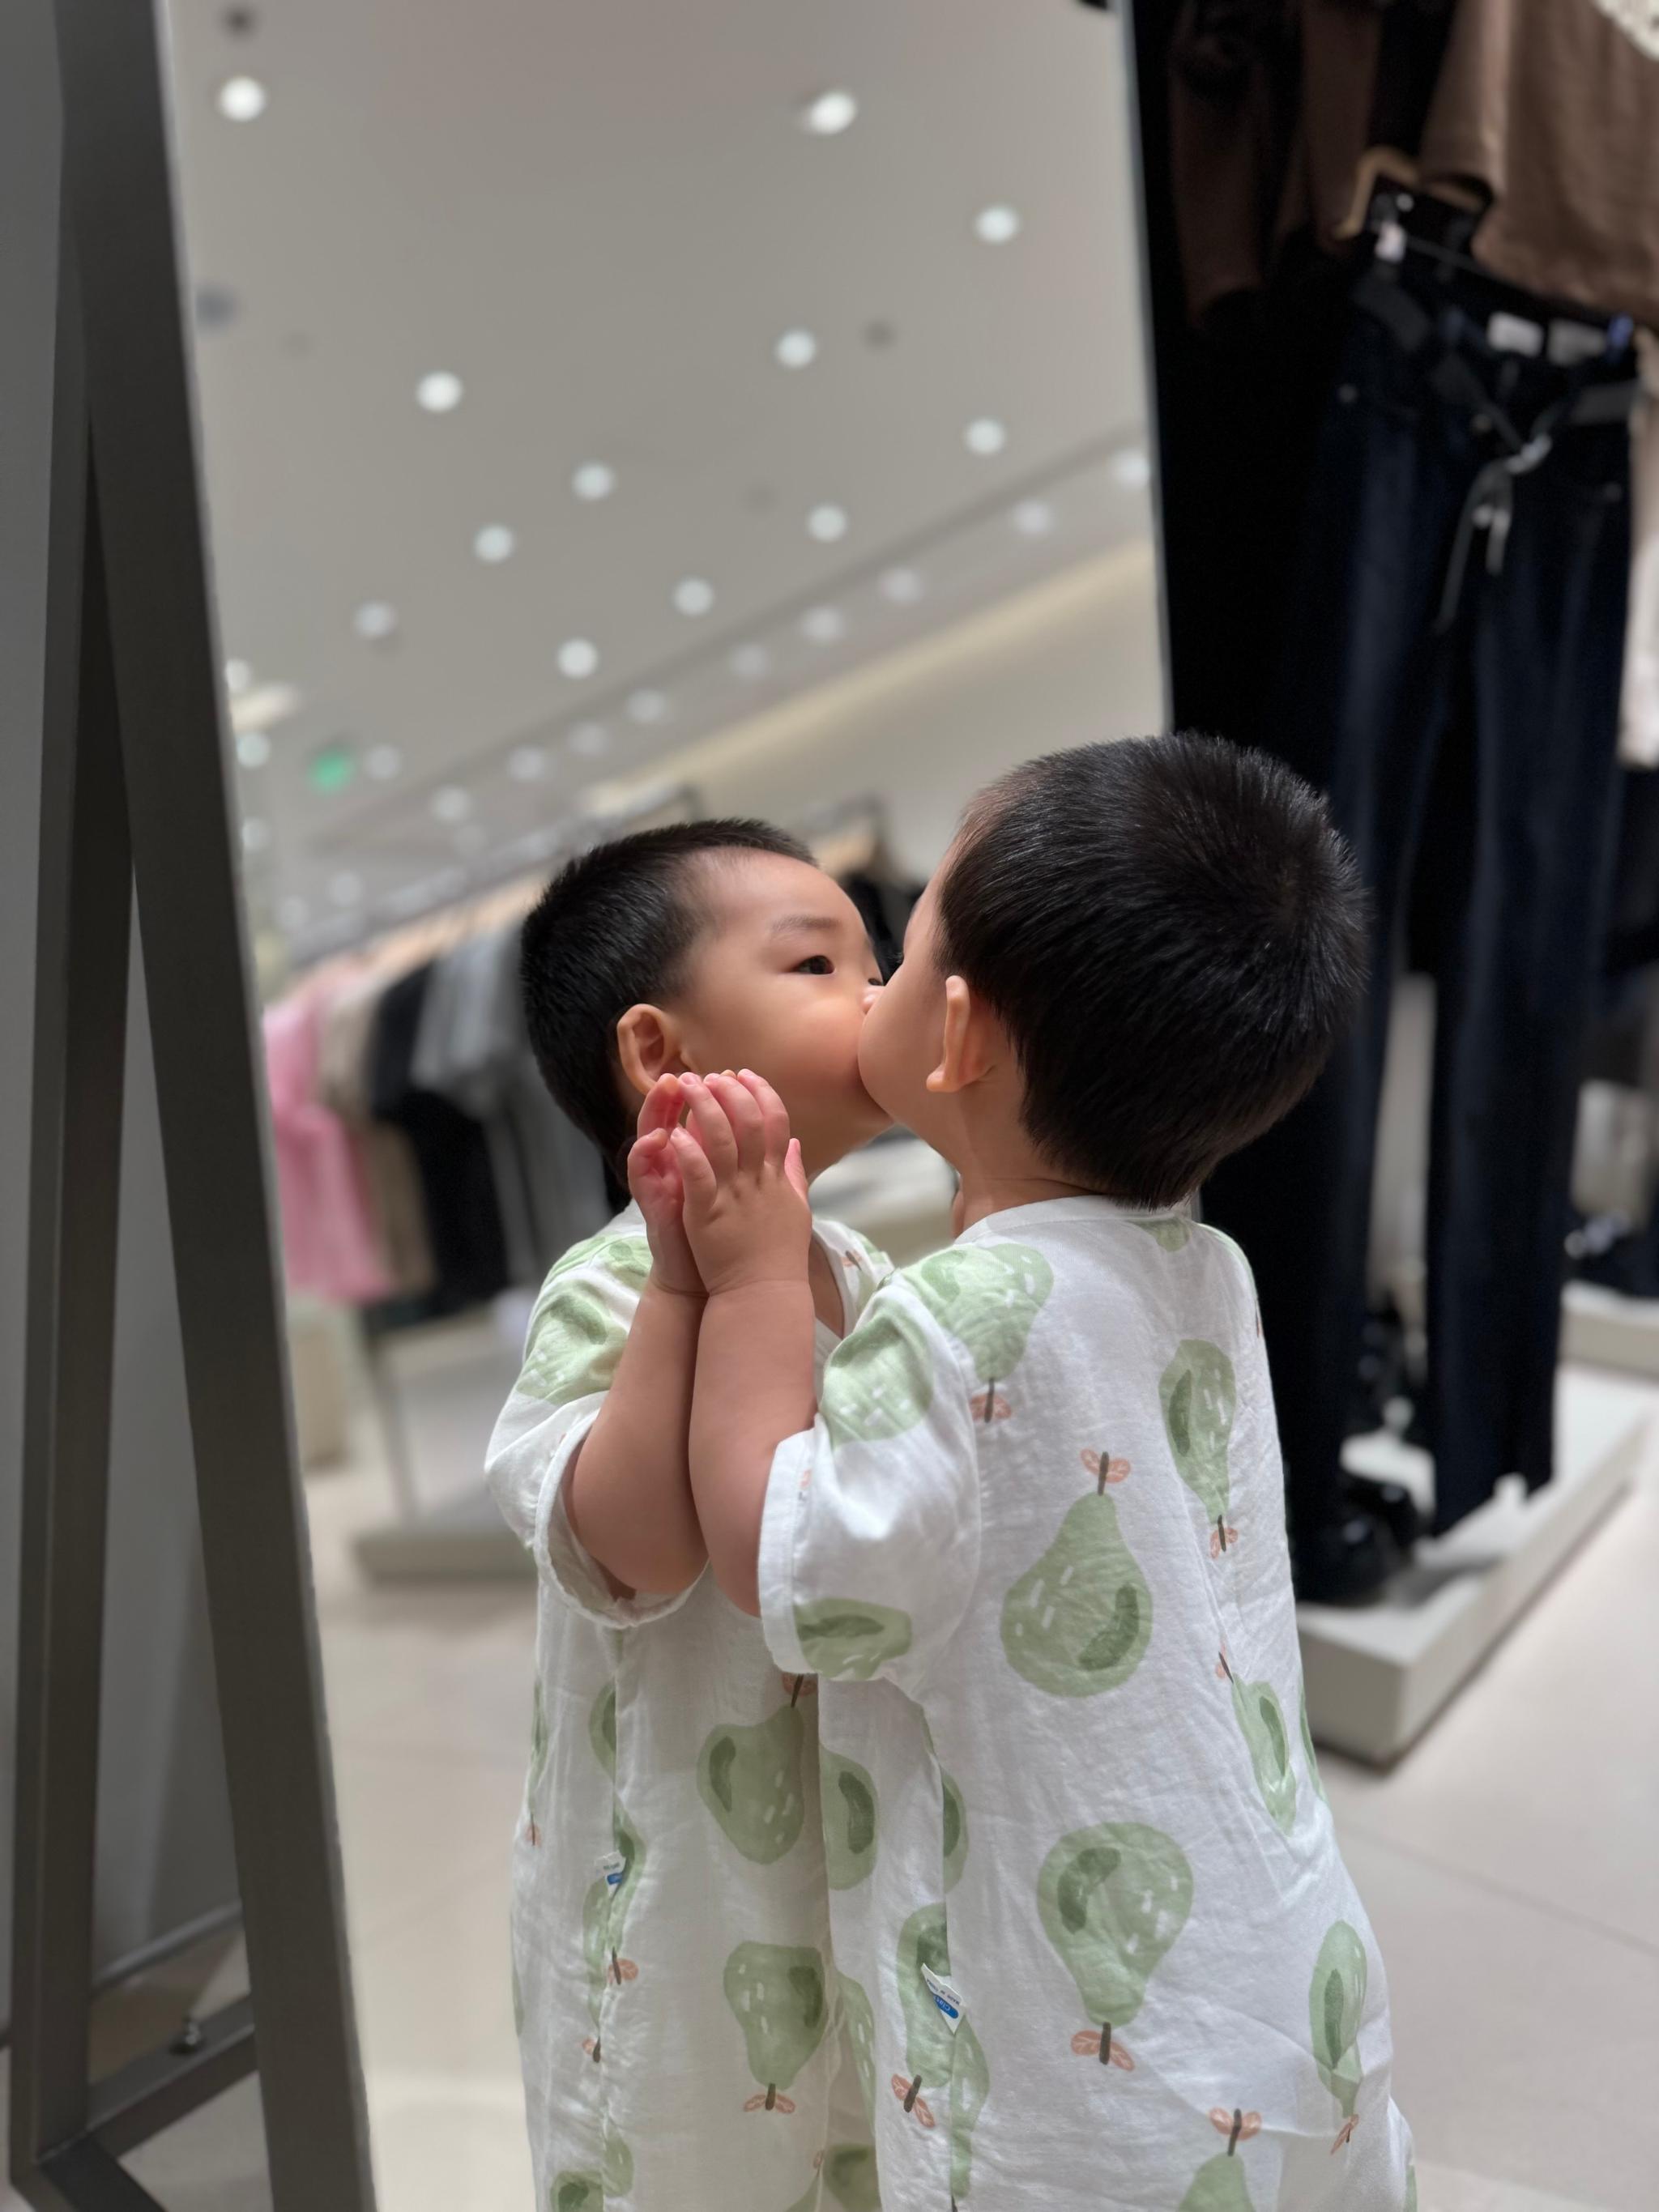 A young child in a green patterned outfit kisses their reflection in a mirror, standing in a clothing store